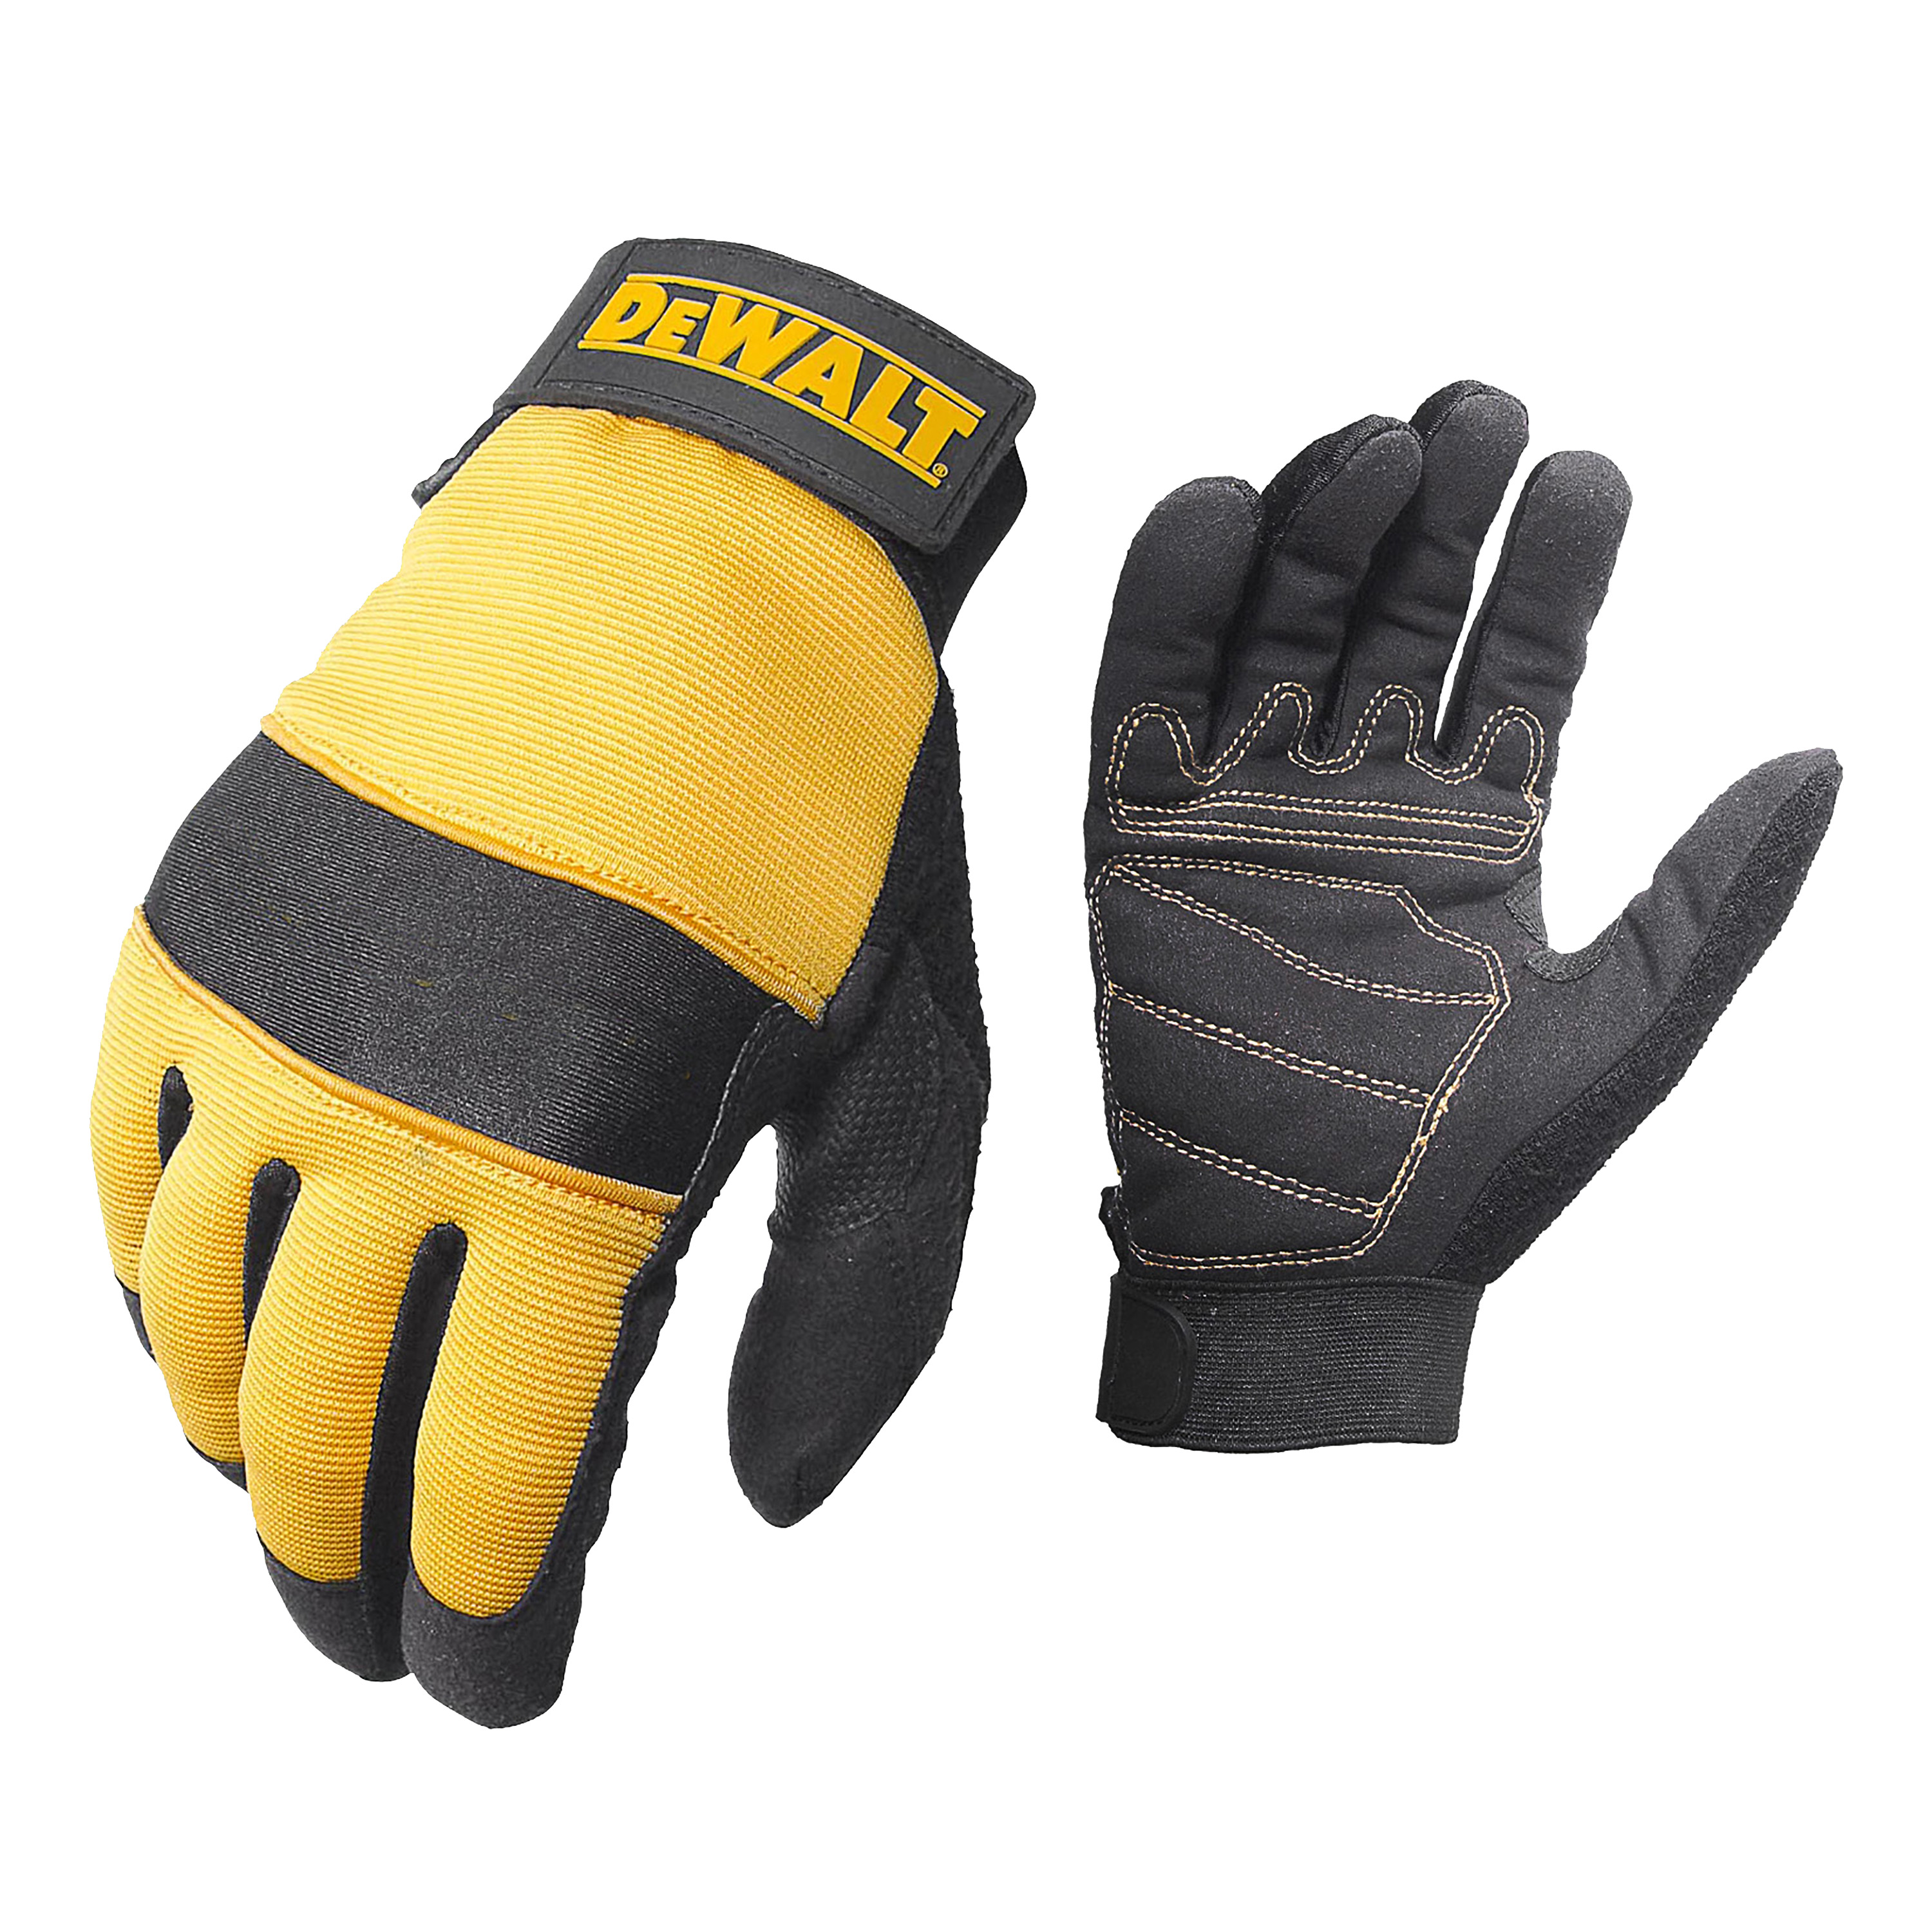 DPG20 All Purpose Synthetic Leather Glove - Size M